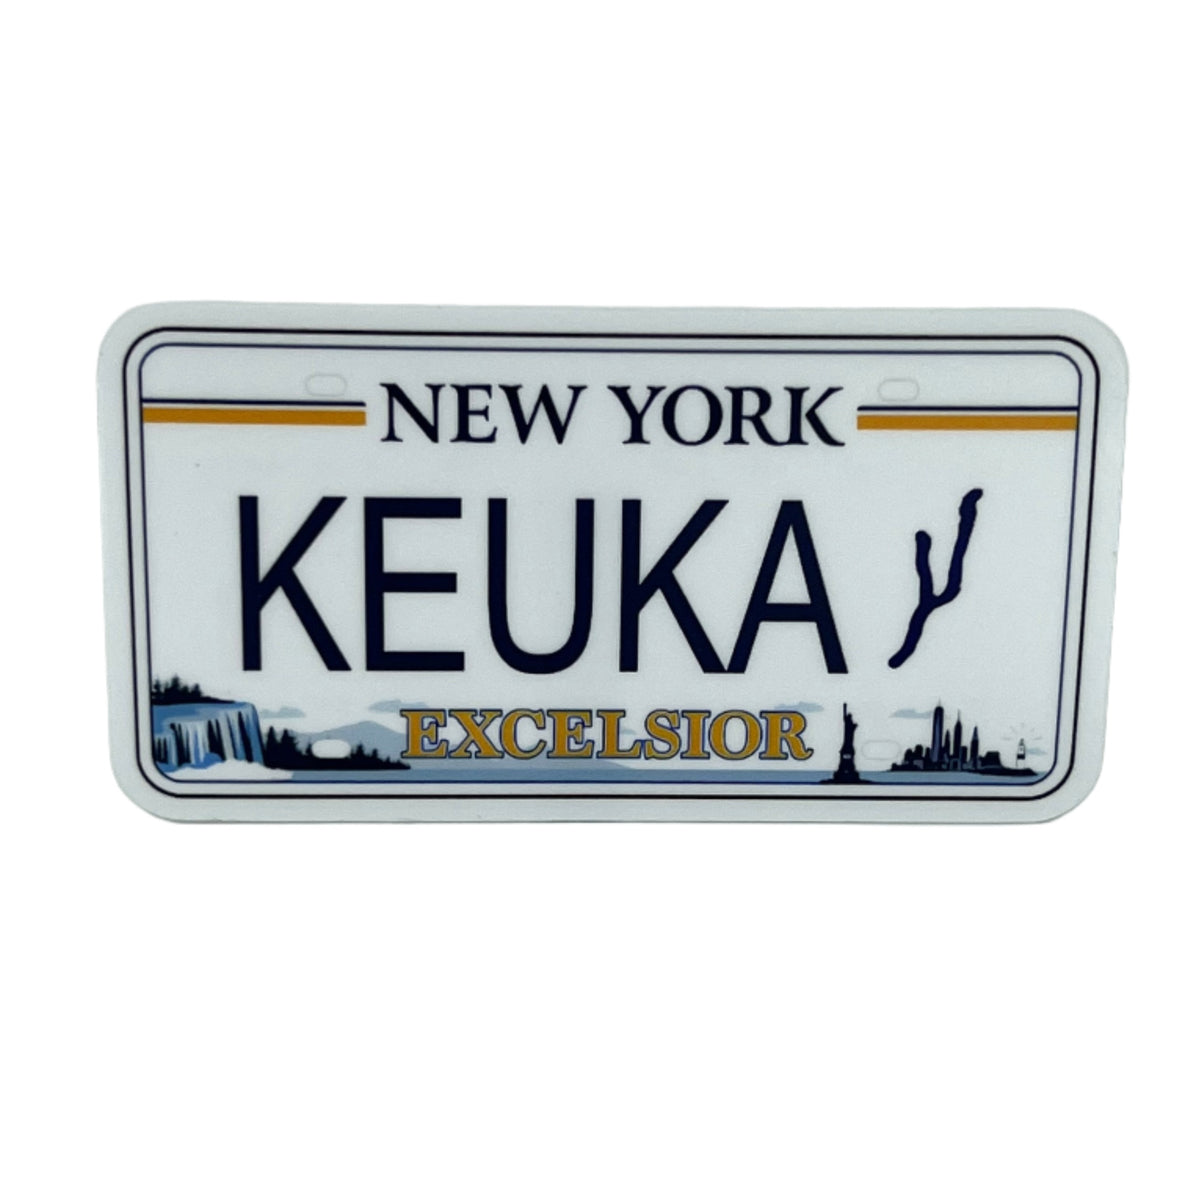 QKA (or Keuka) NY License Plate Sticker or Magnet